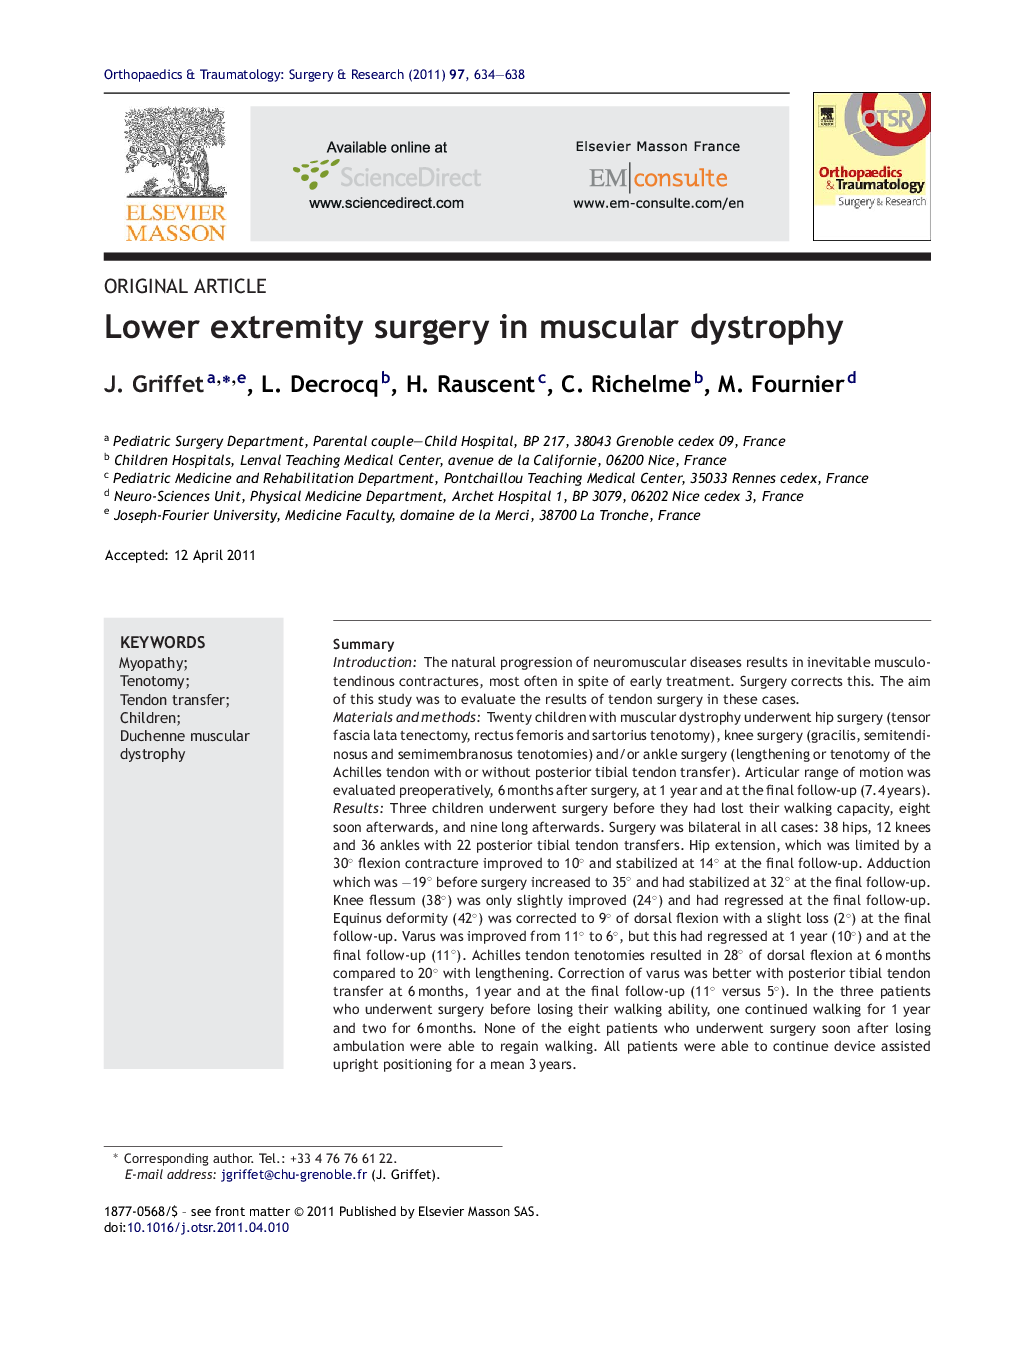 Lower extremity surgery in muscular dystrophy